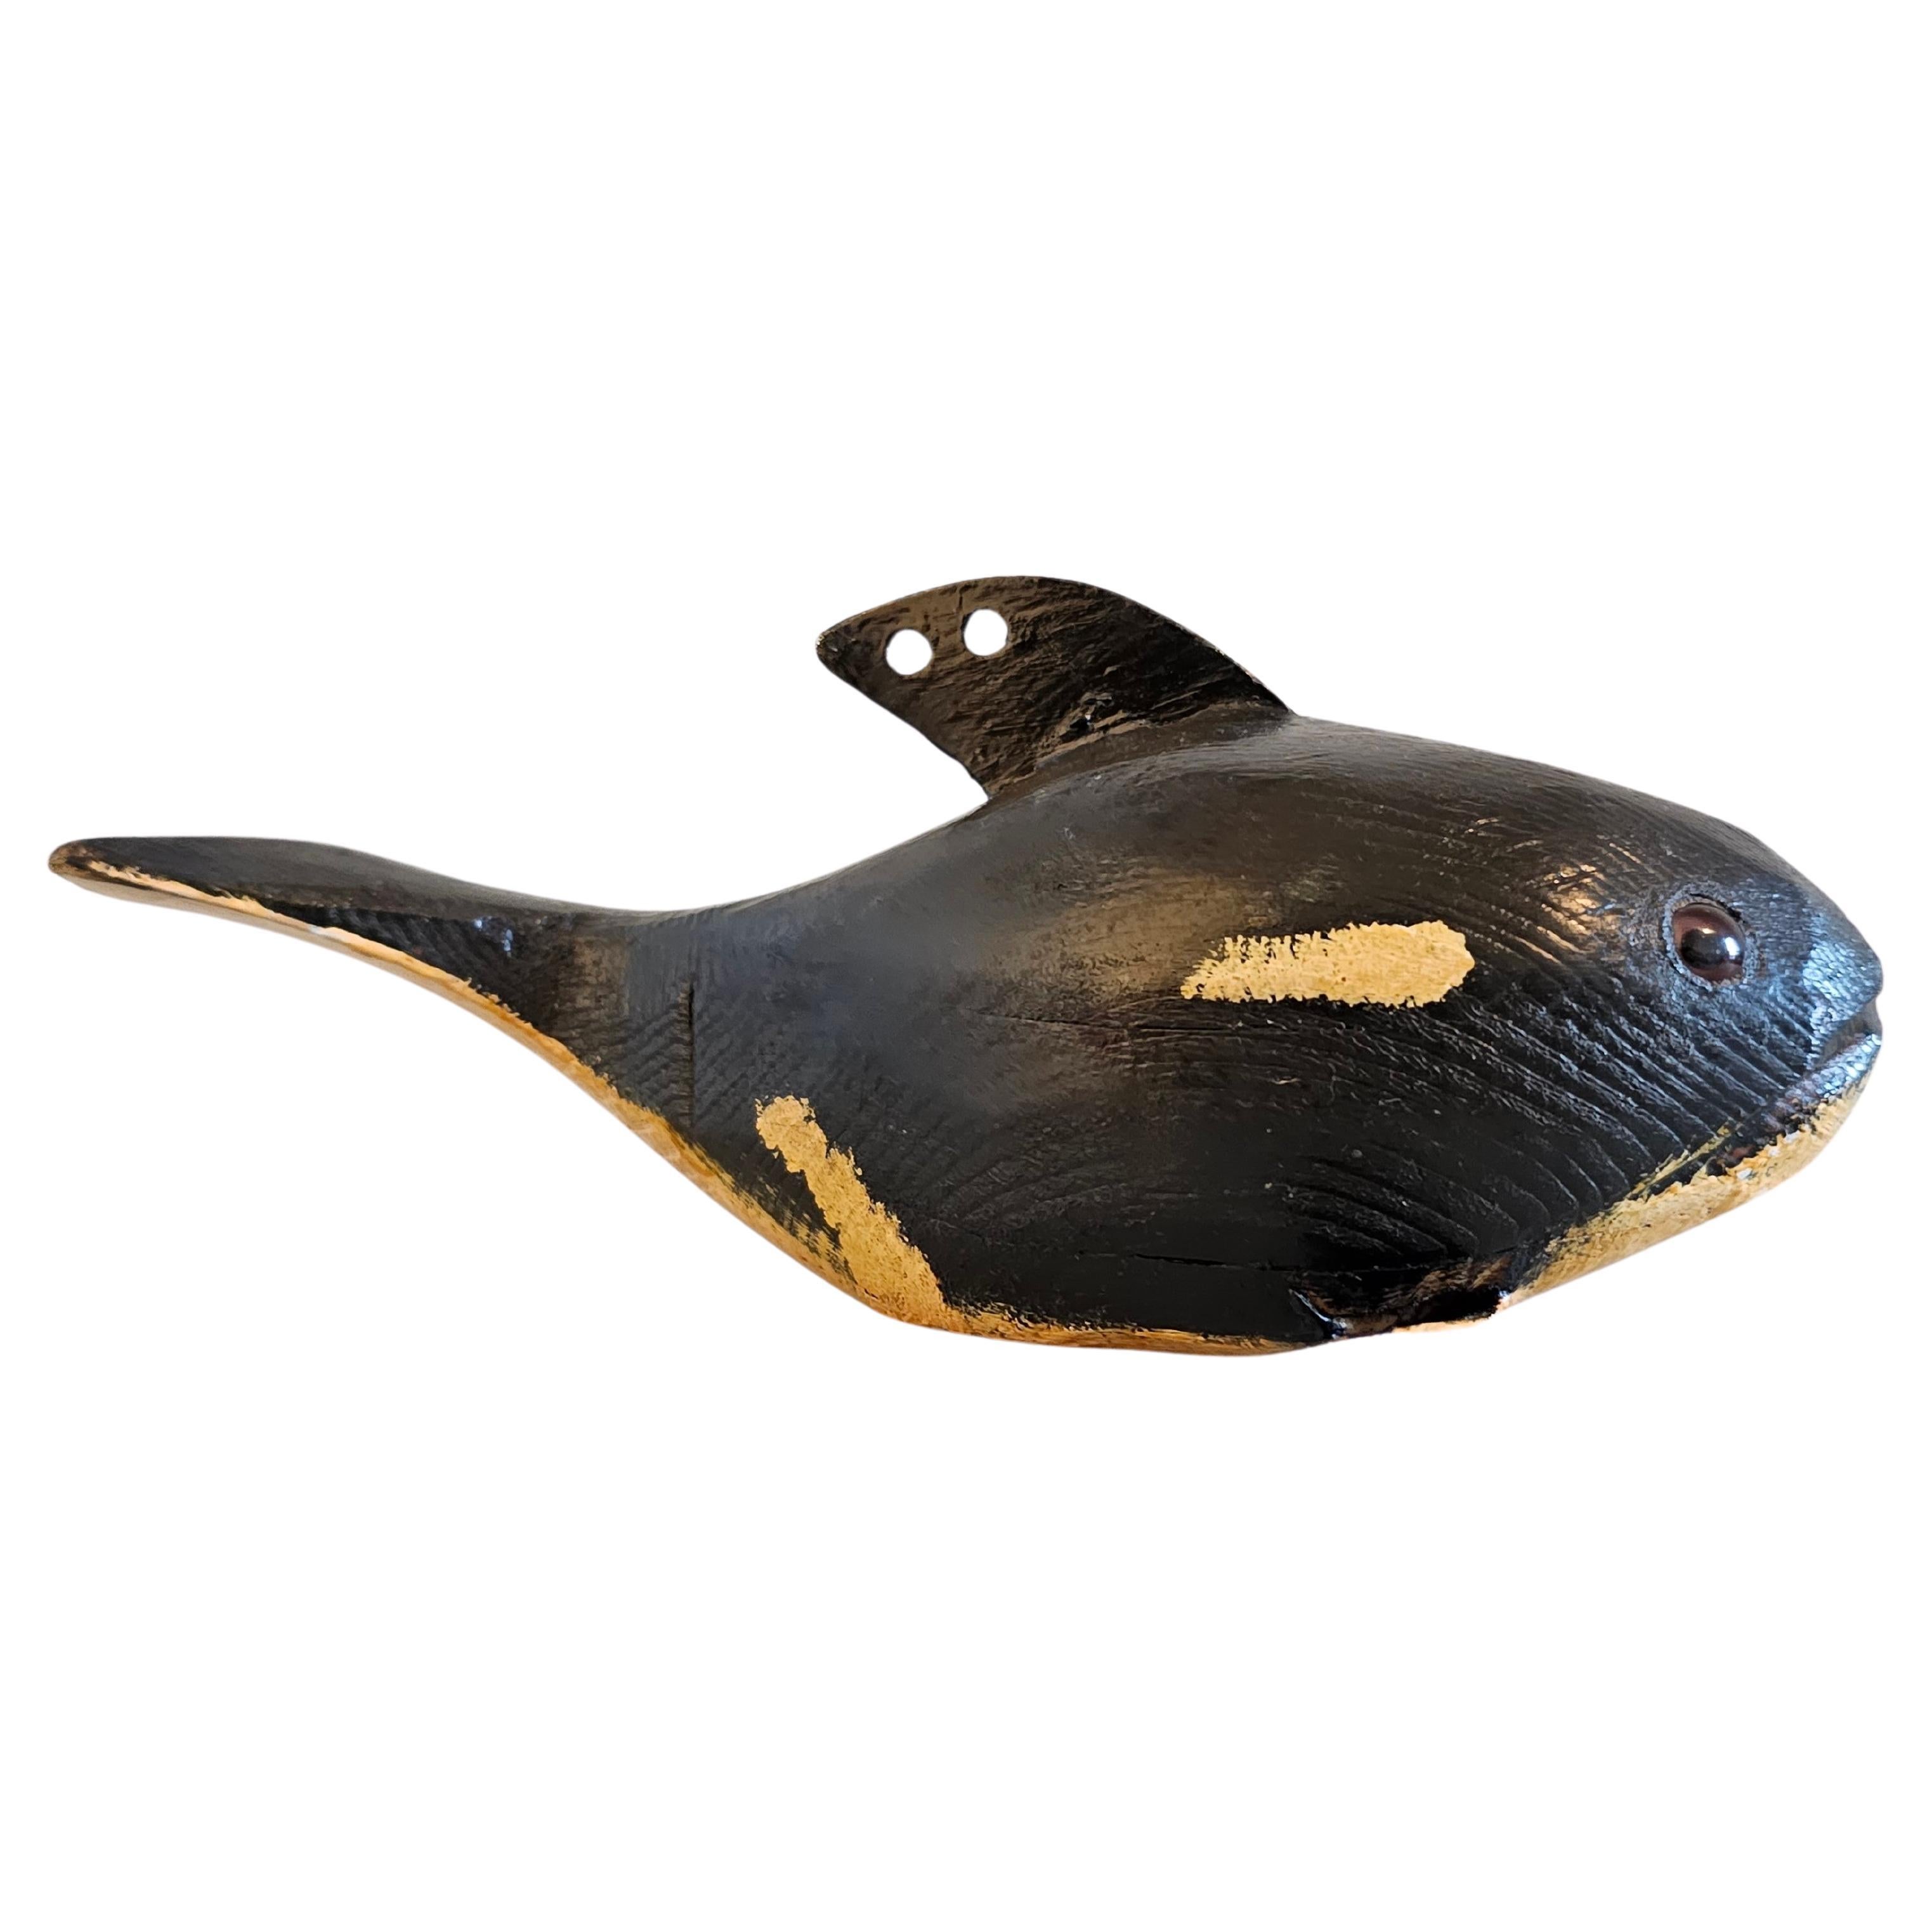 Duluth Fish Decoy American Folk Art Carved Painted Orca Killer Whale Sculpture